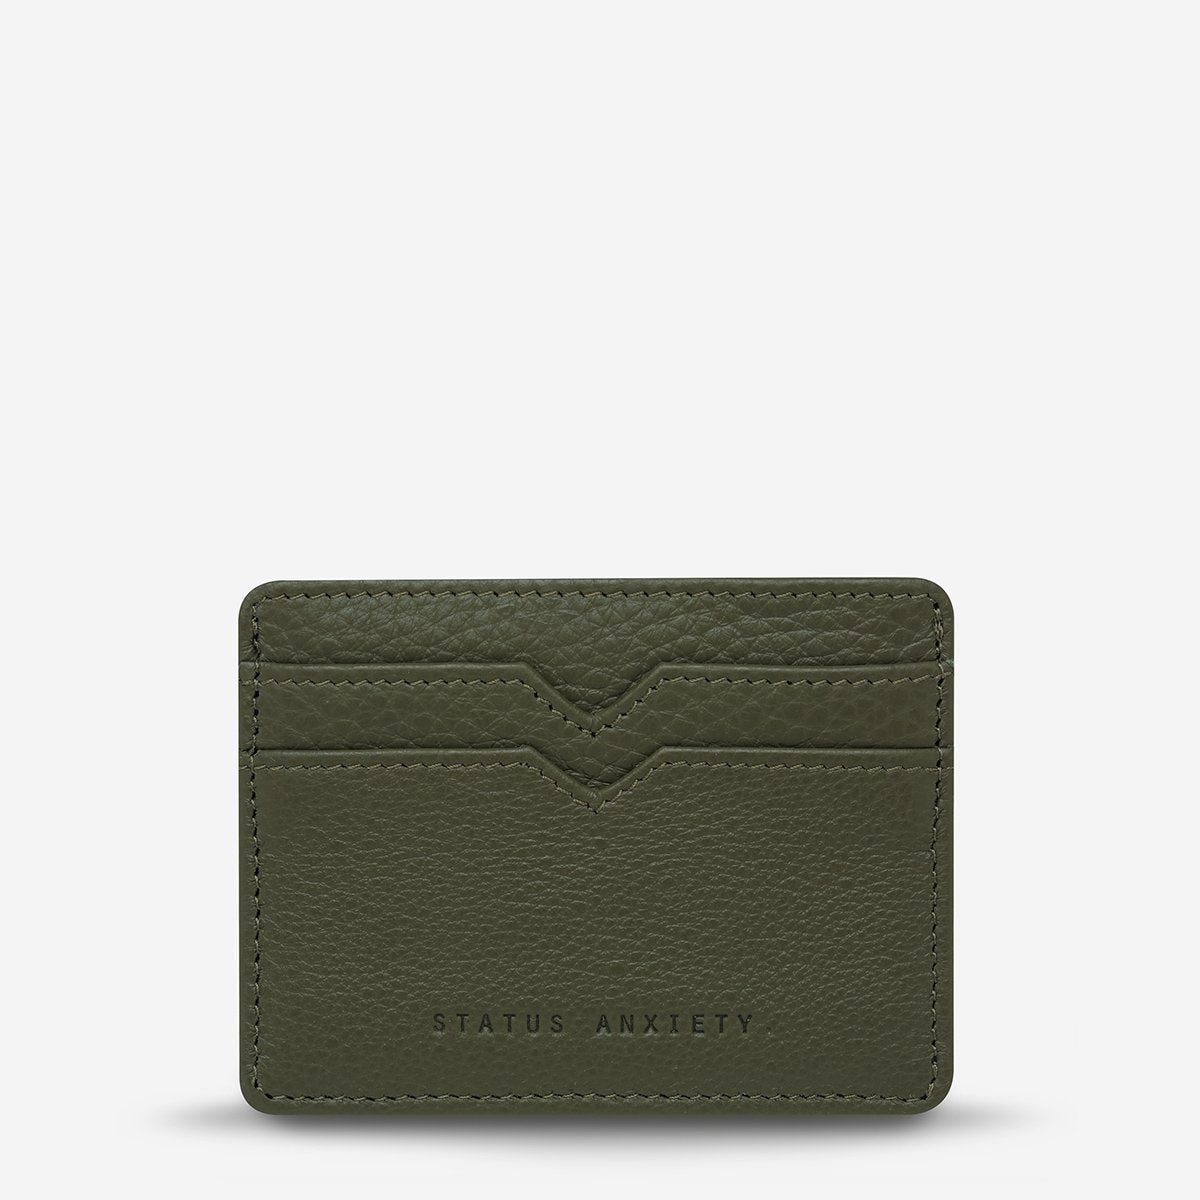 status anxiety wallet together for now khaki green front